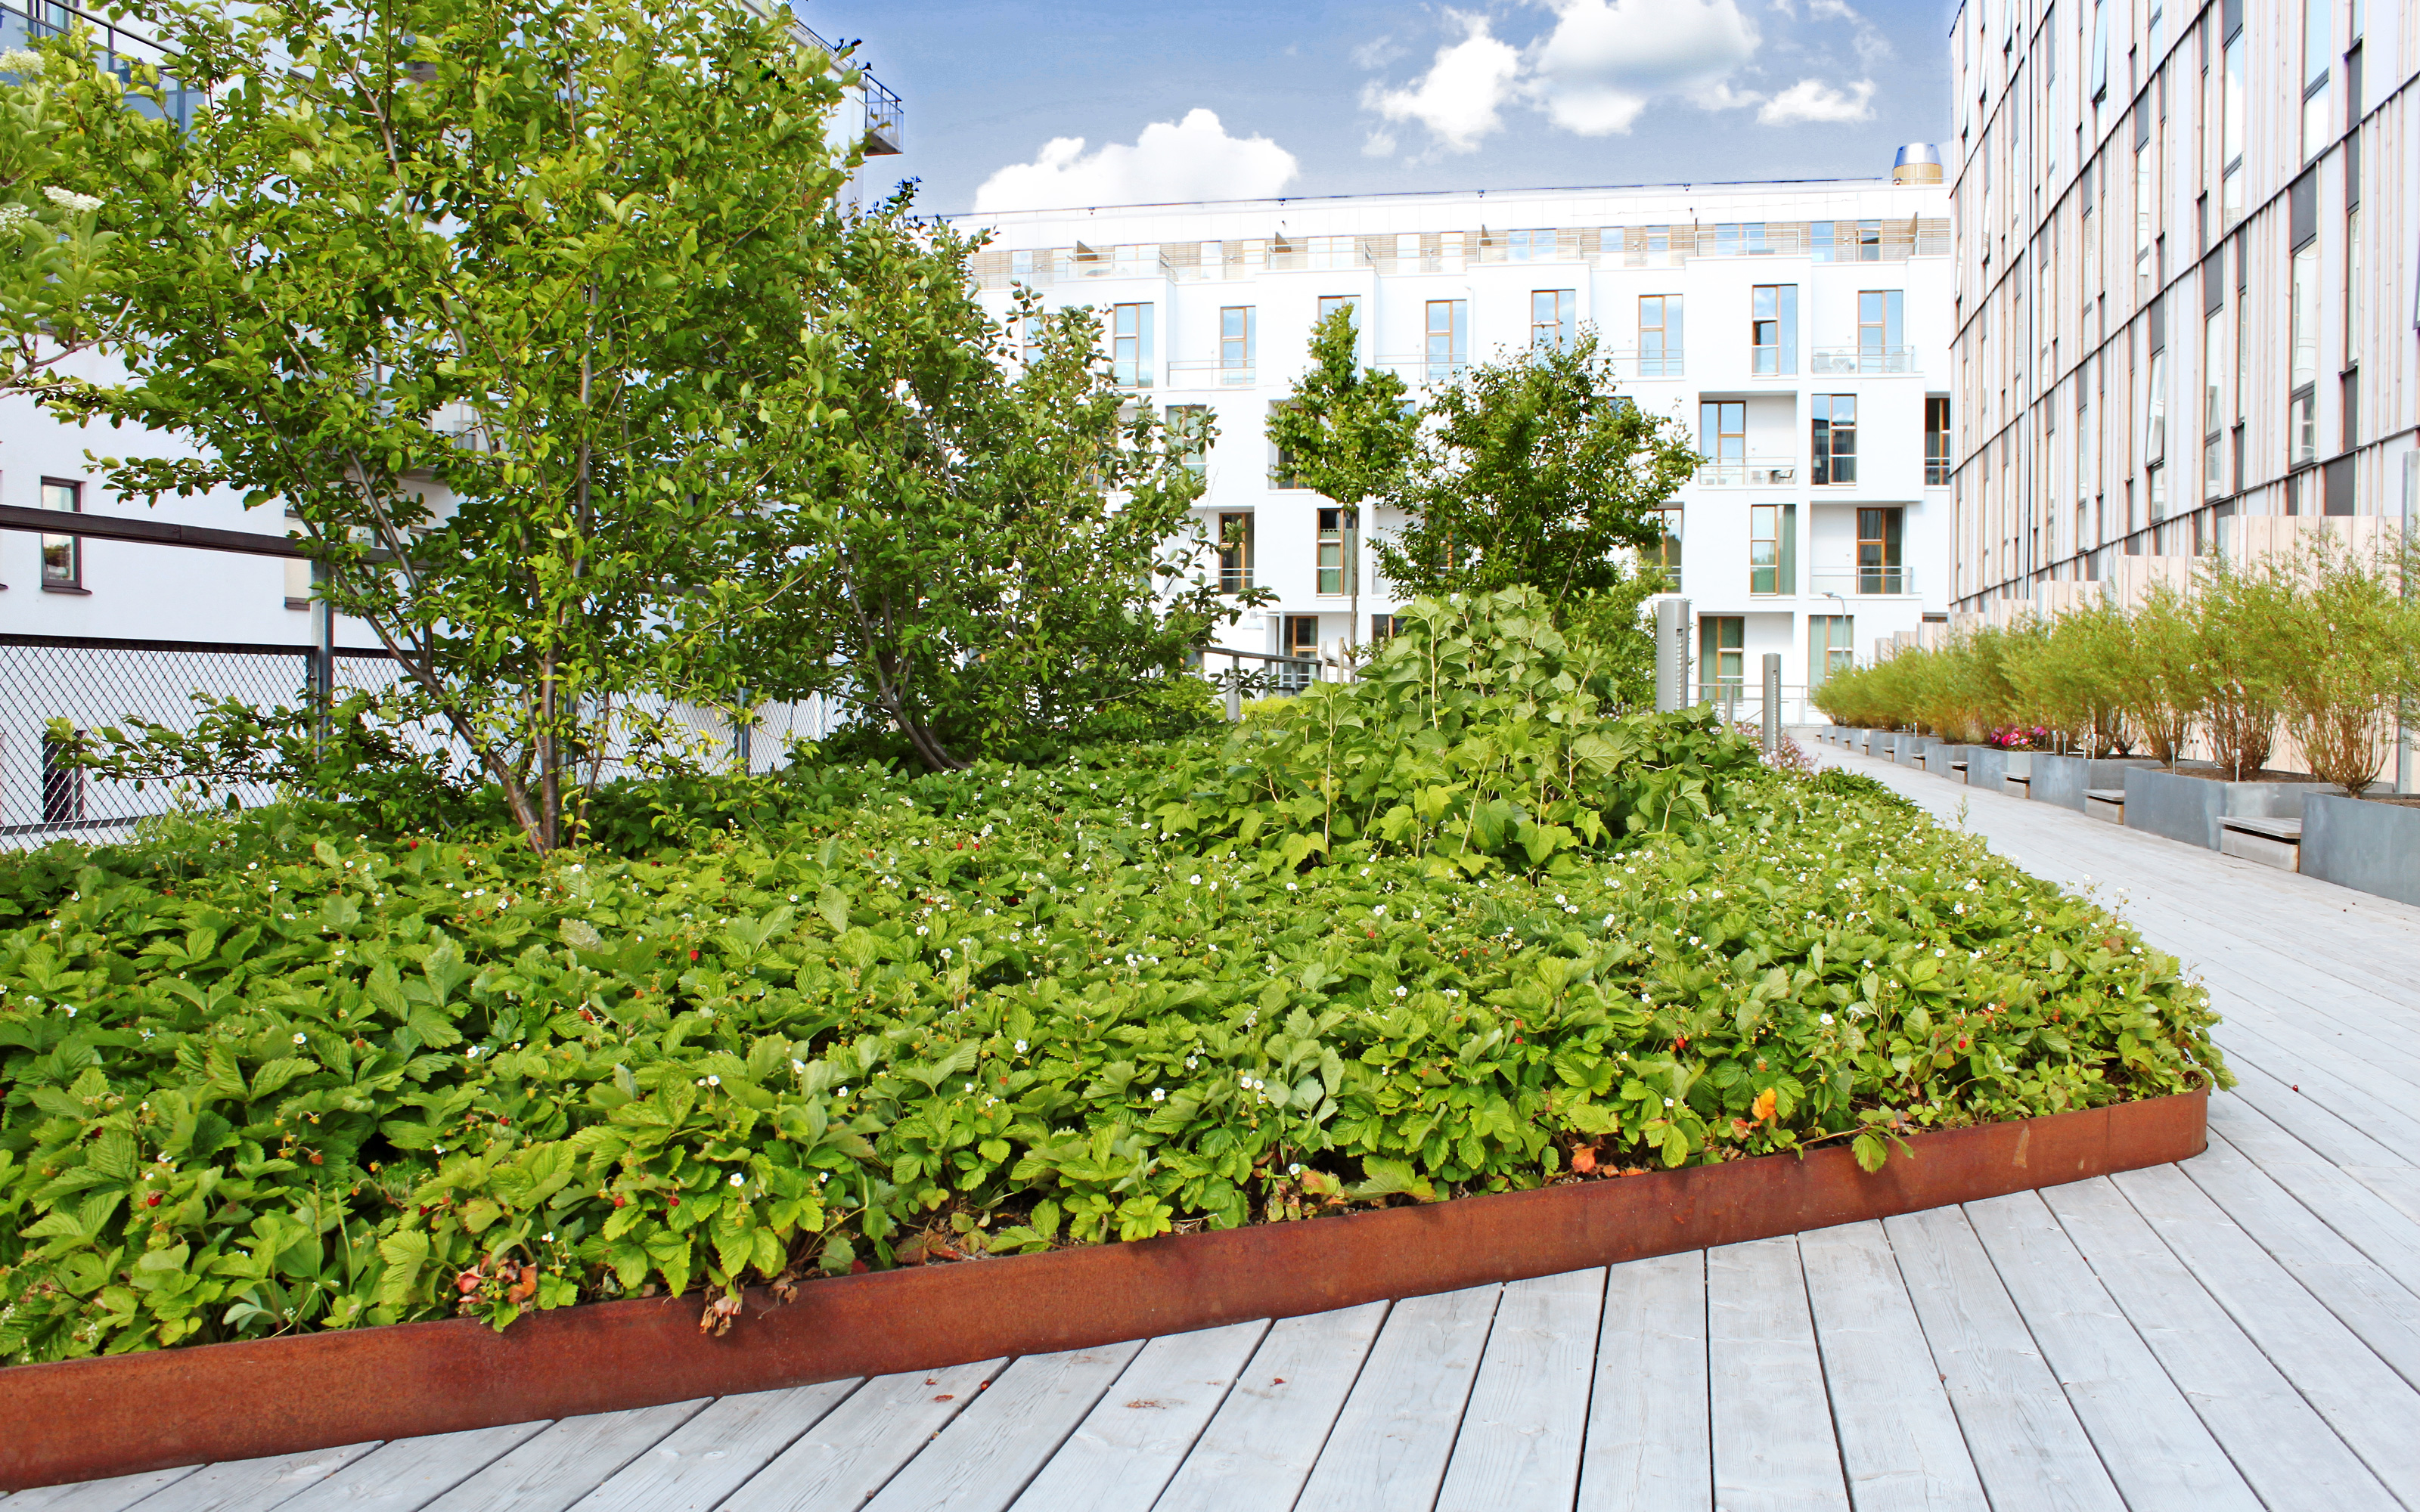 Roof garden with strawberries growing in plantinge beds and wooden decking.